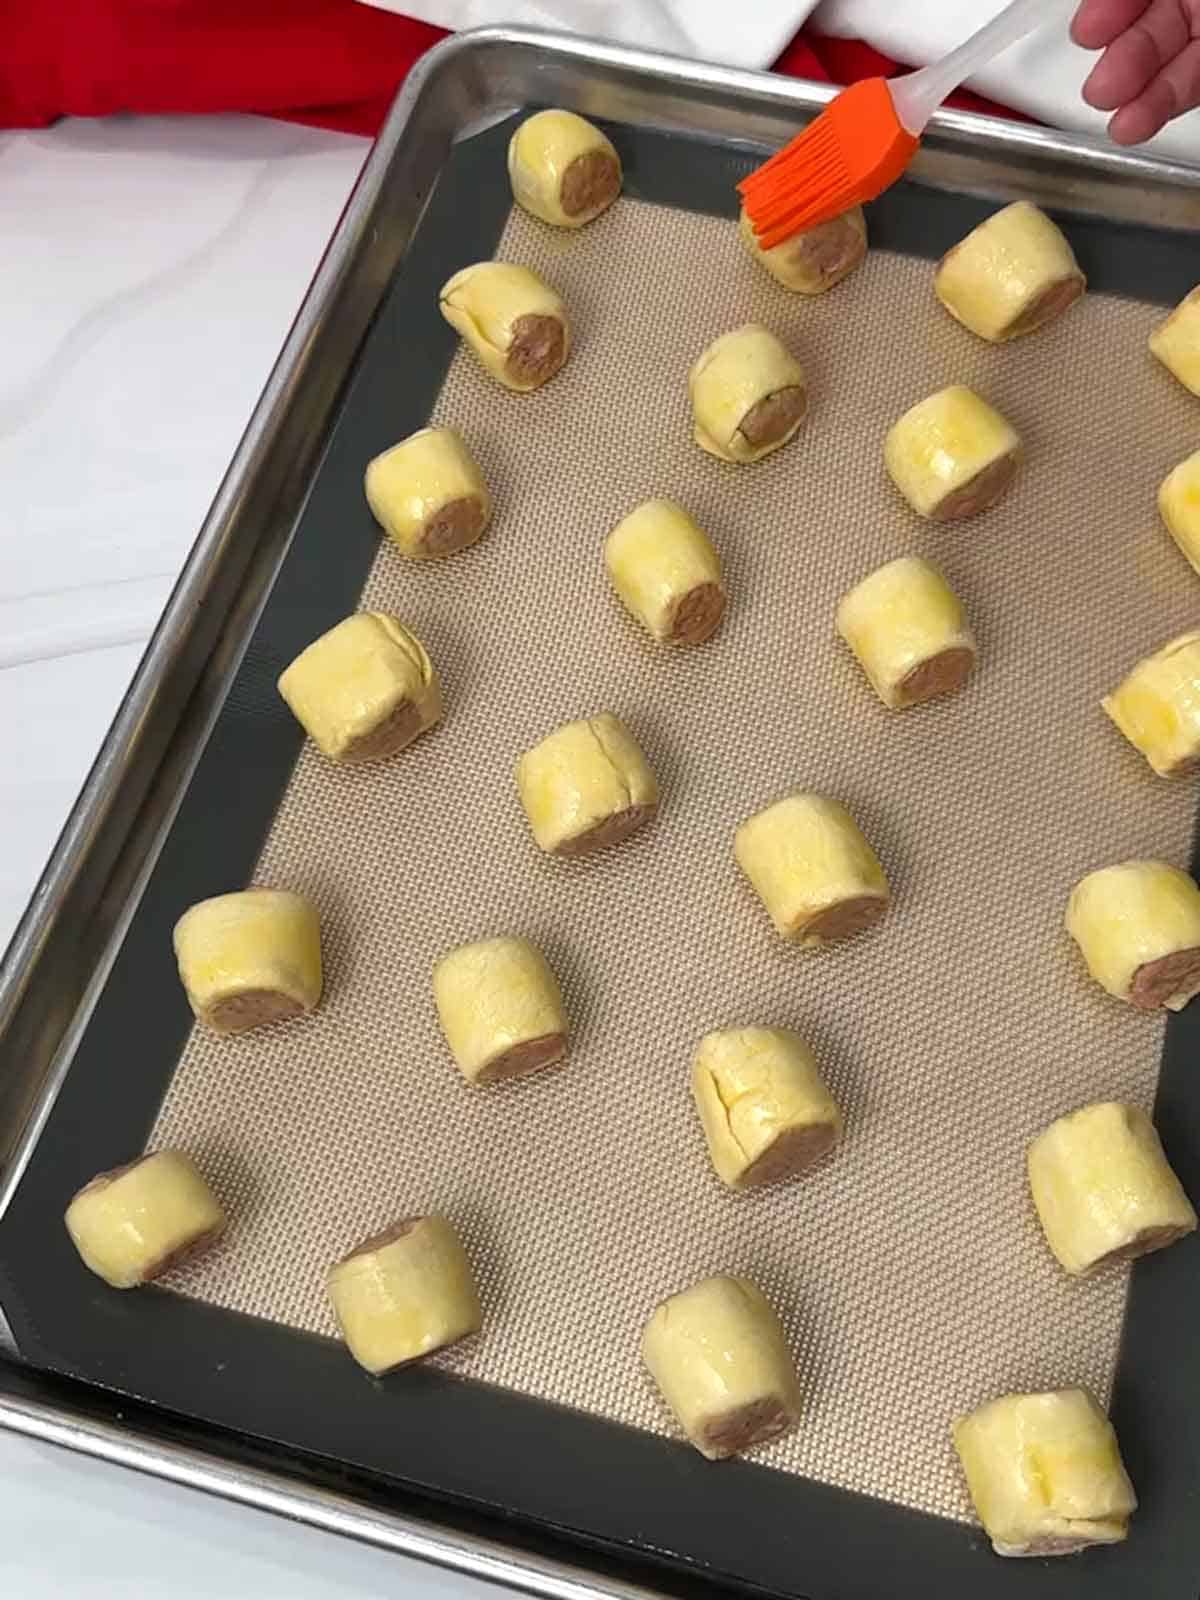 Brushing the sausage roll bites with egg wash.